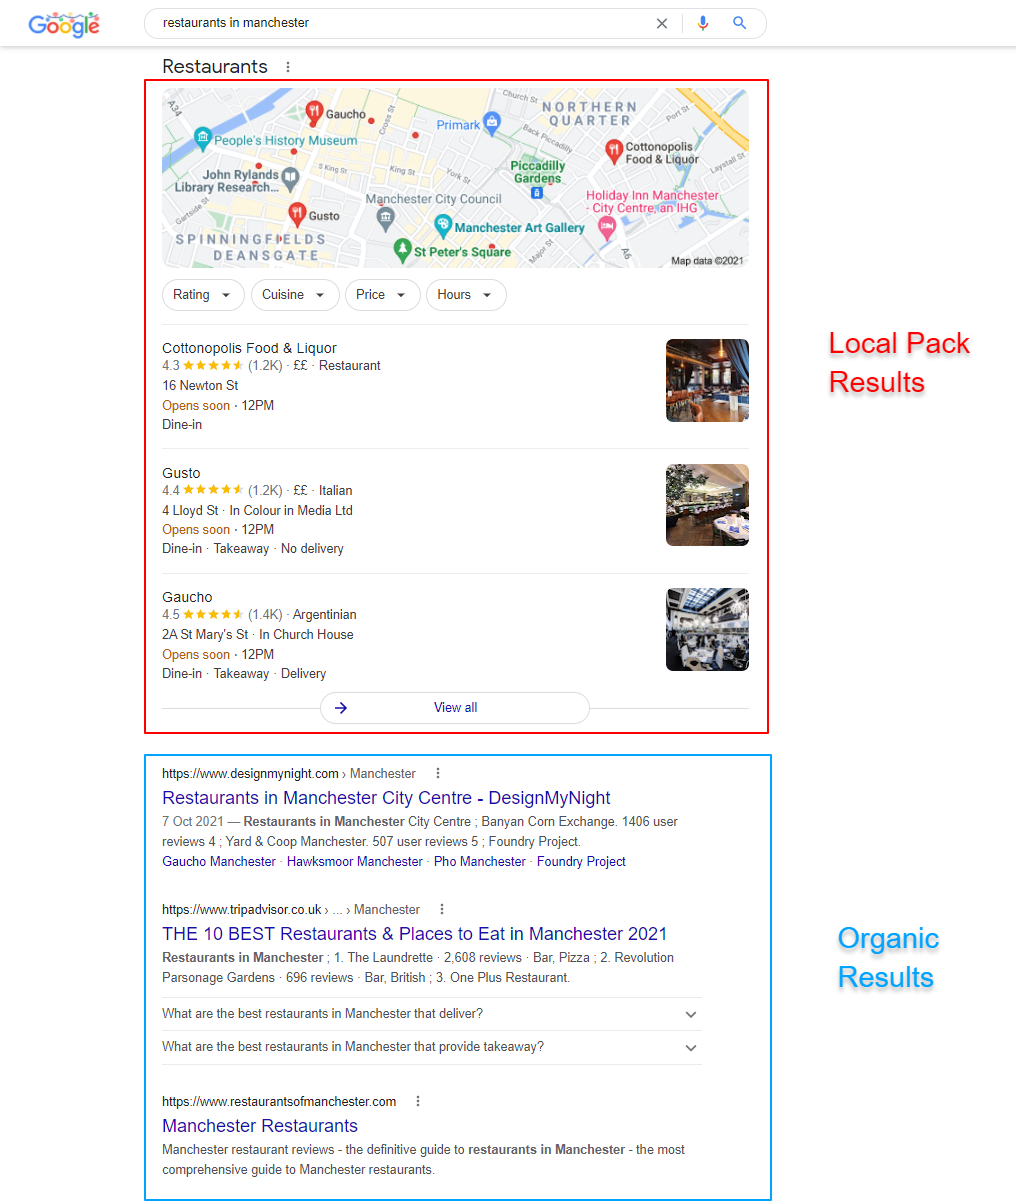 Google Local Pack Results VS Organic Results